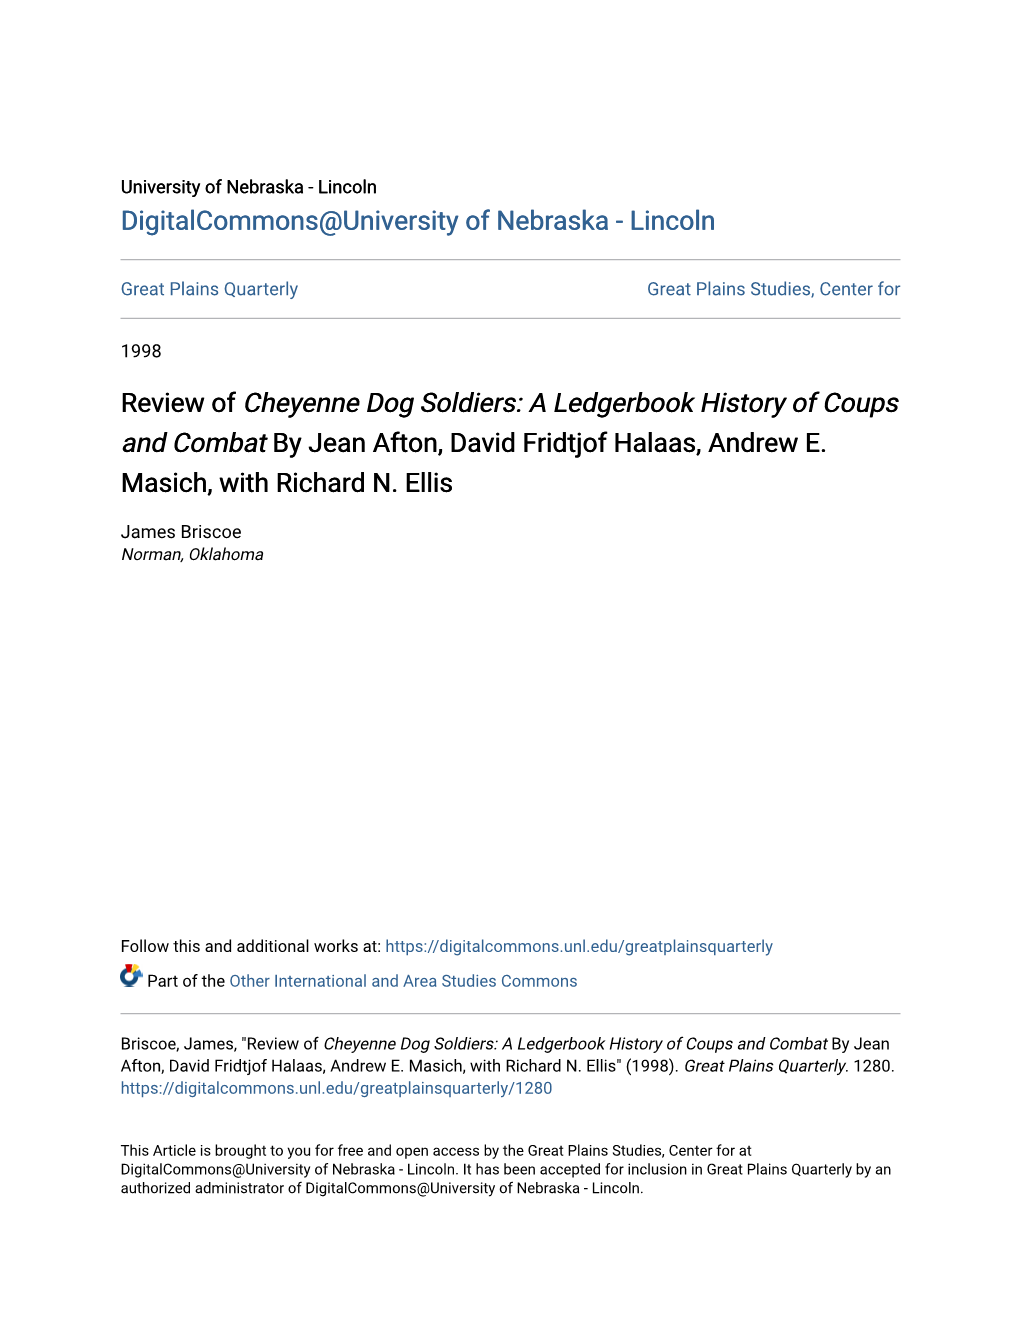 Review of Cheyenne Dog Soldiers: a Ledgerbook History of Coups and Combat by Jean Afton, David Fridtjof Halaas, Andrew E